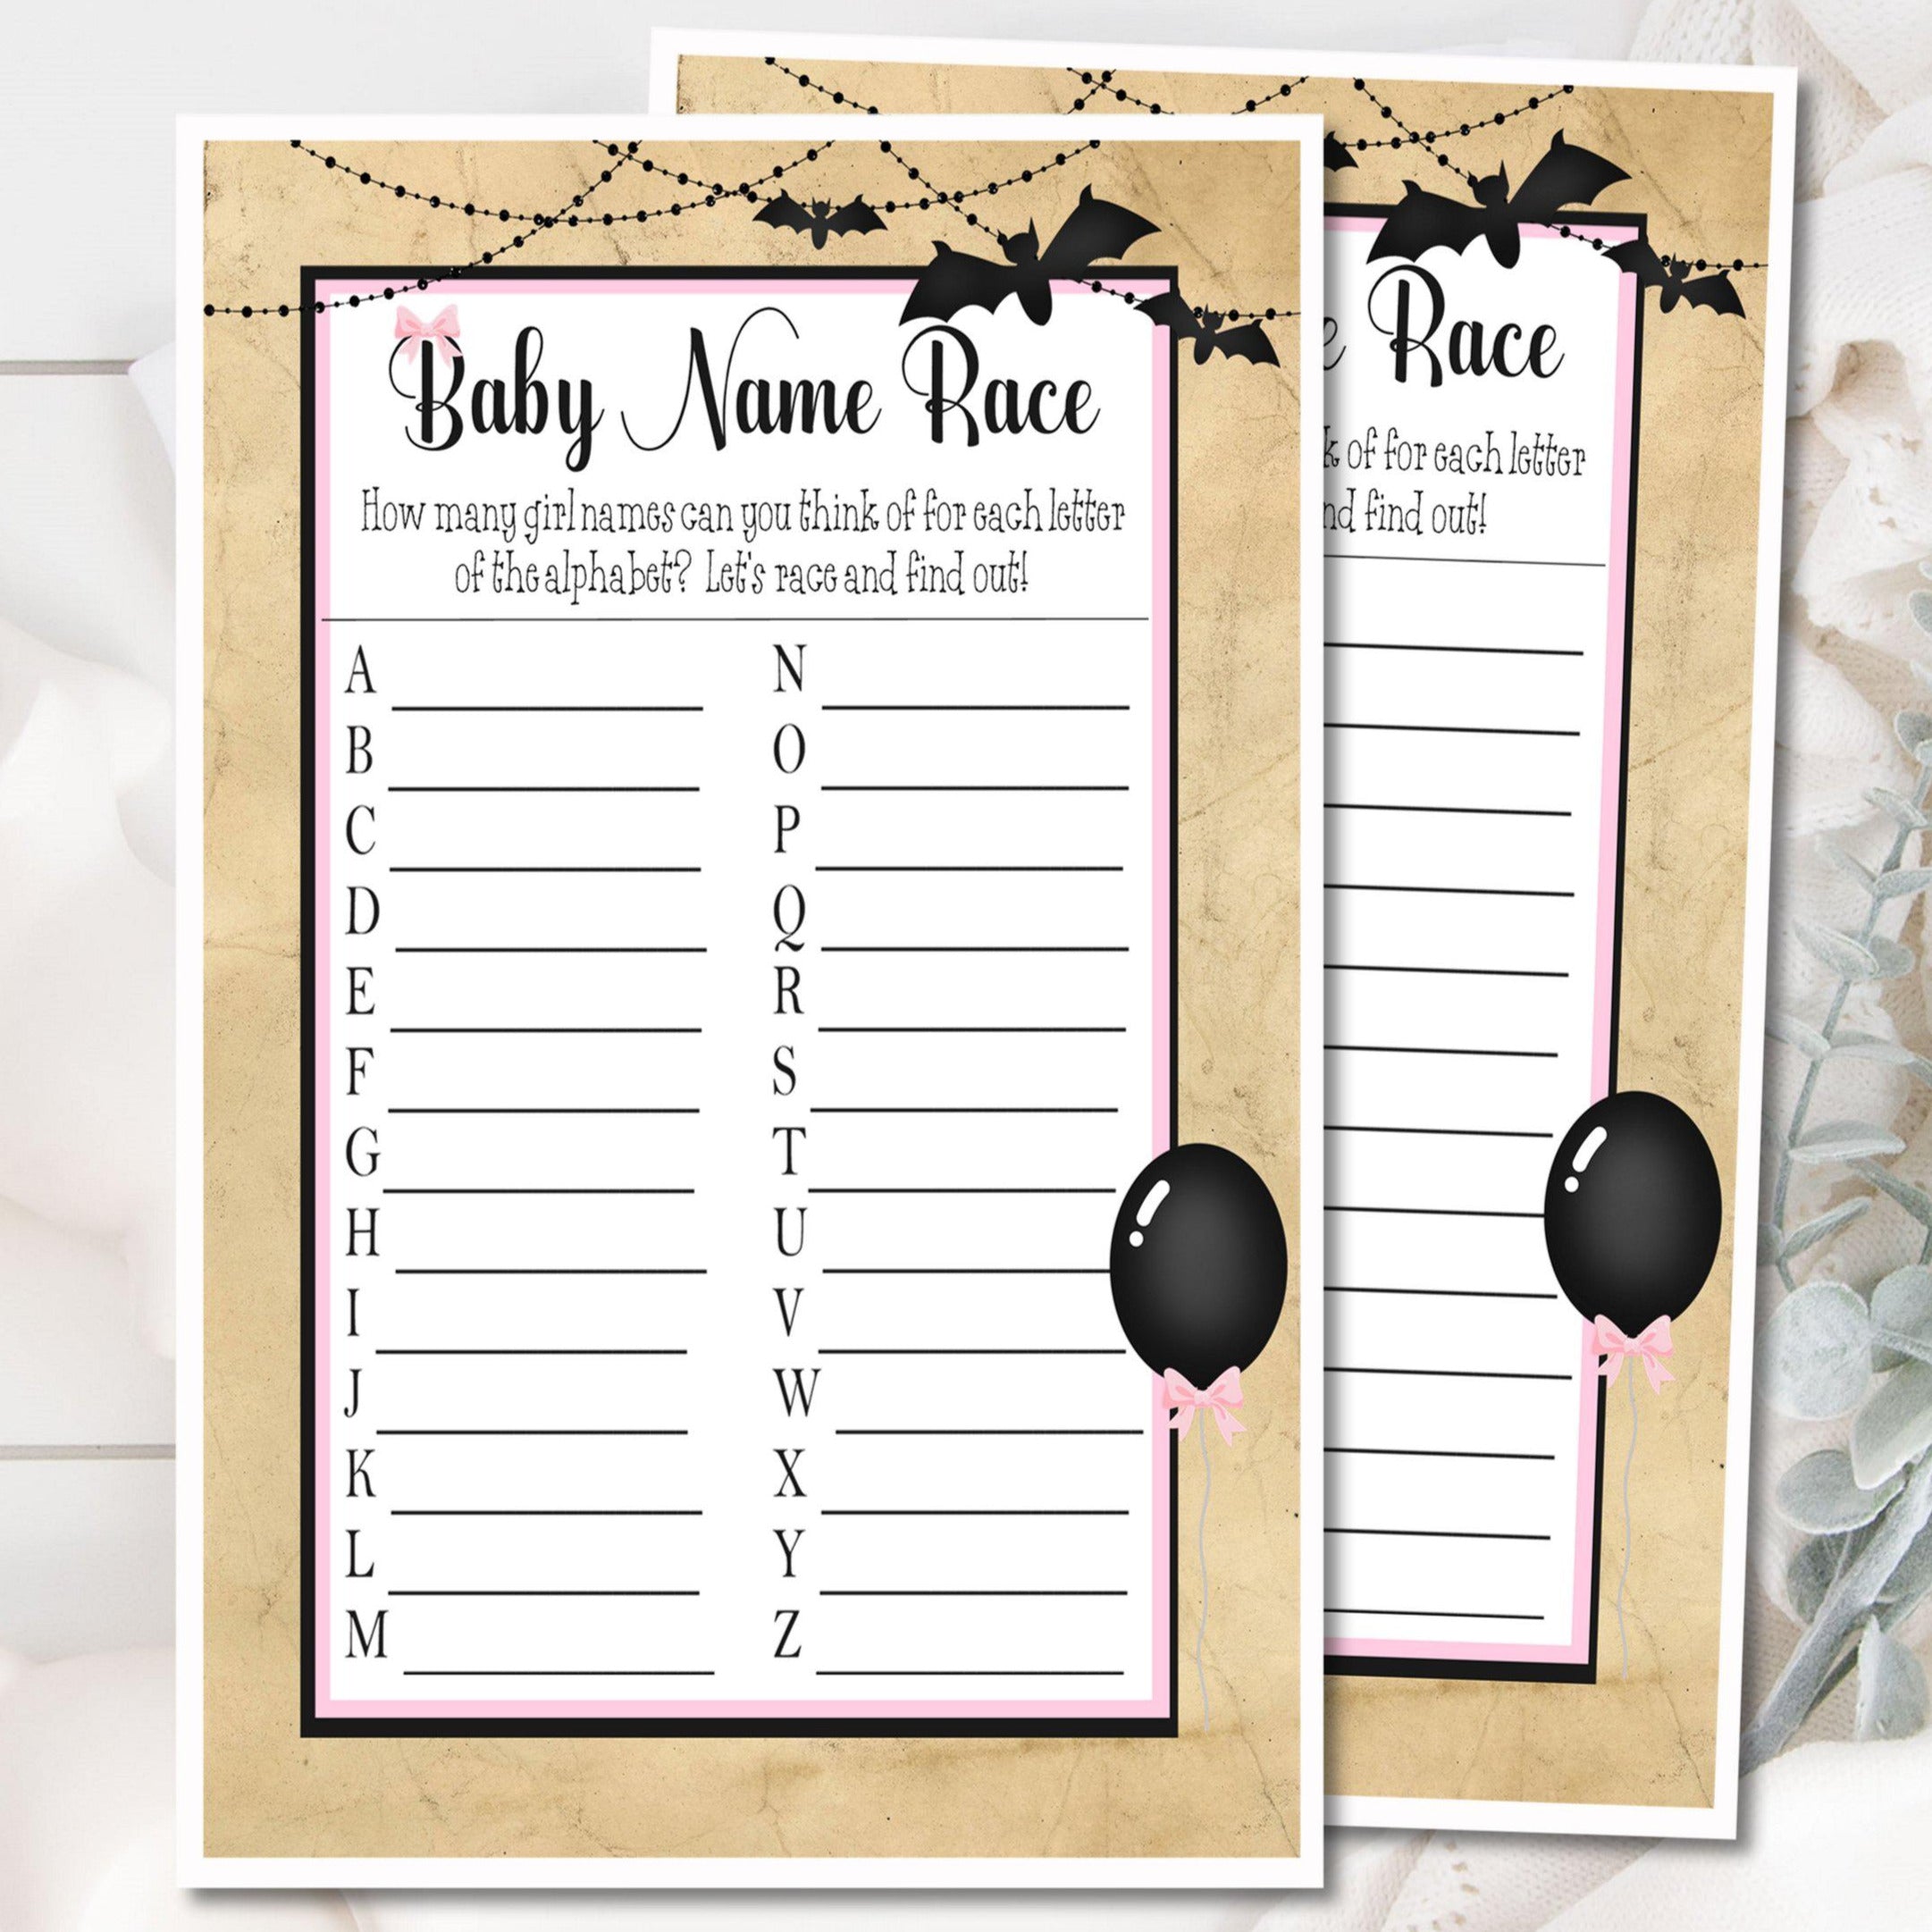 Girls Halloween Baby Shower Name Race Game Cards